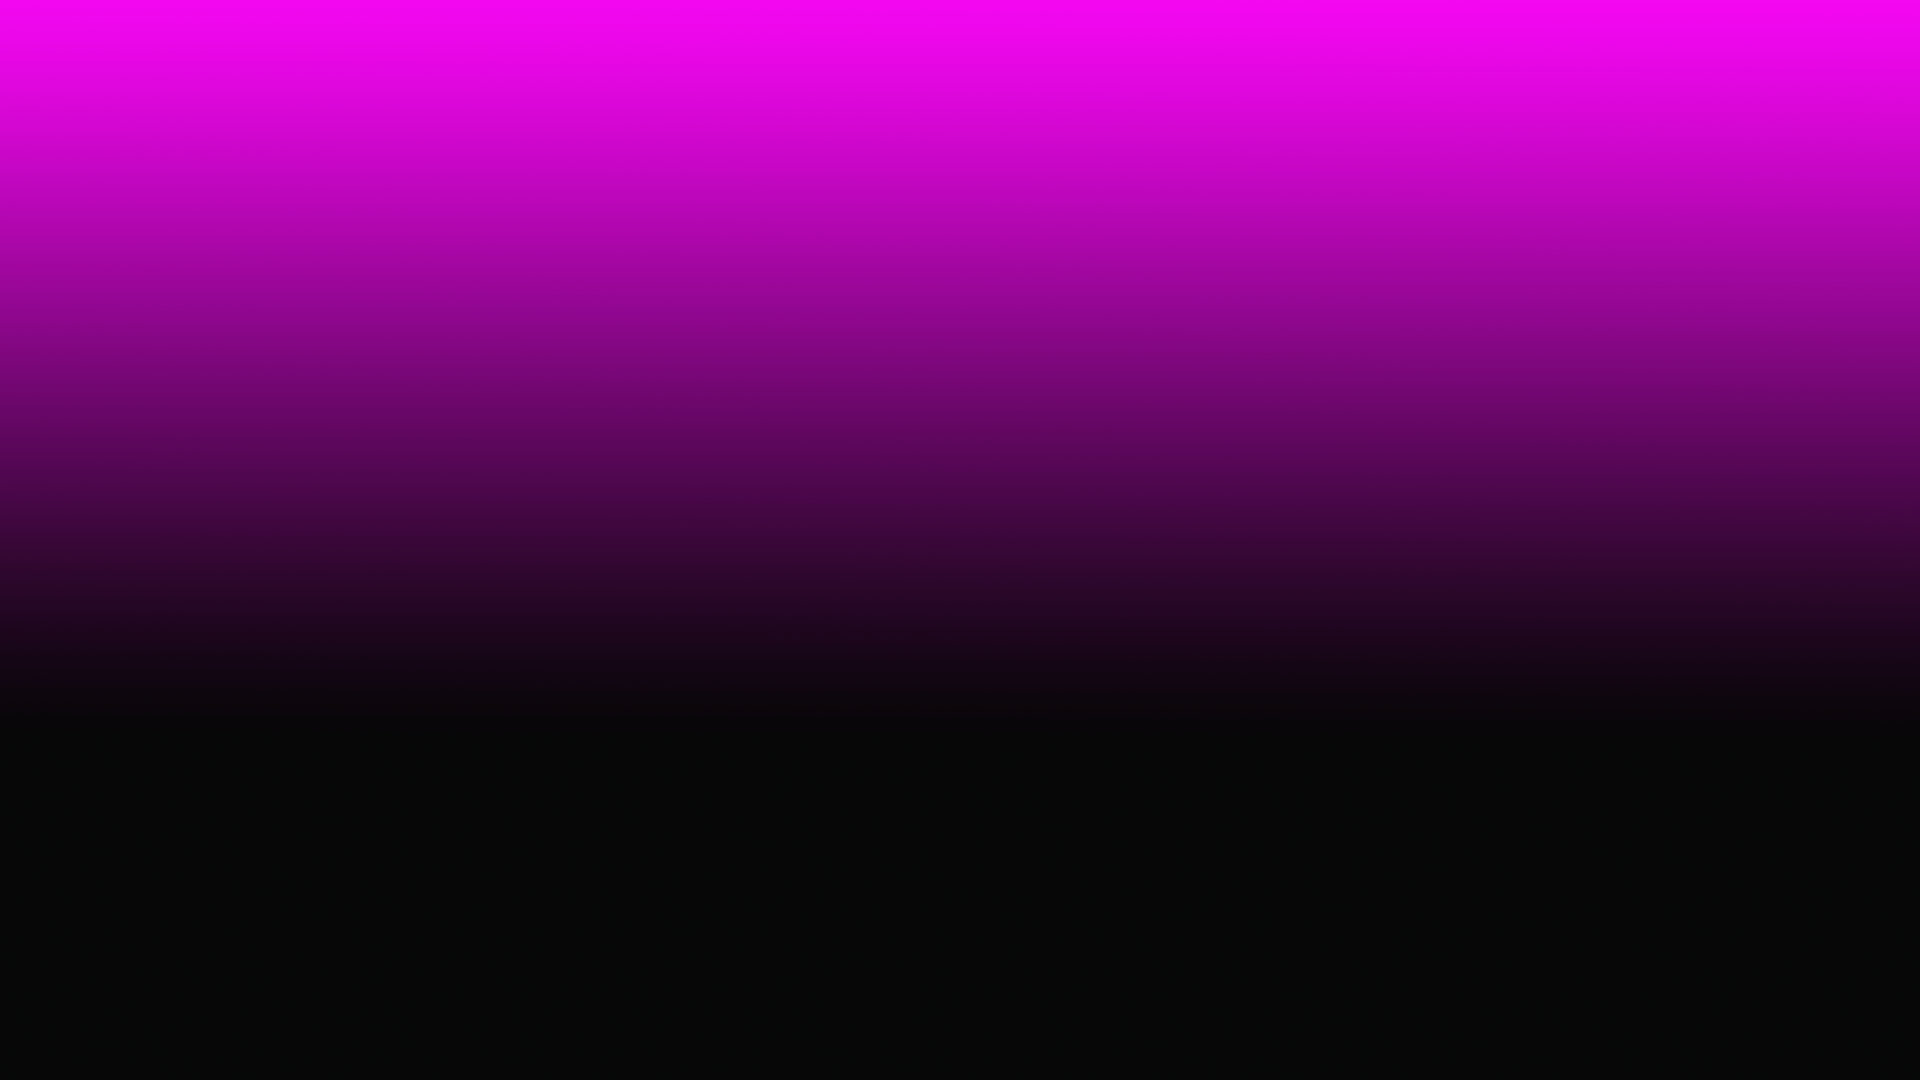 Wallpaper.wiki Pink And Black HD Background PIC WPE001930